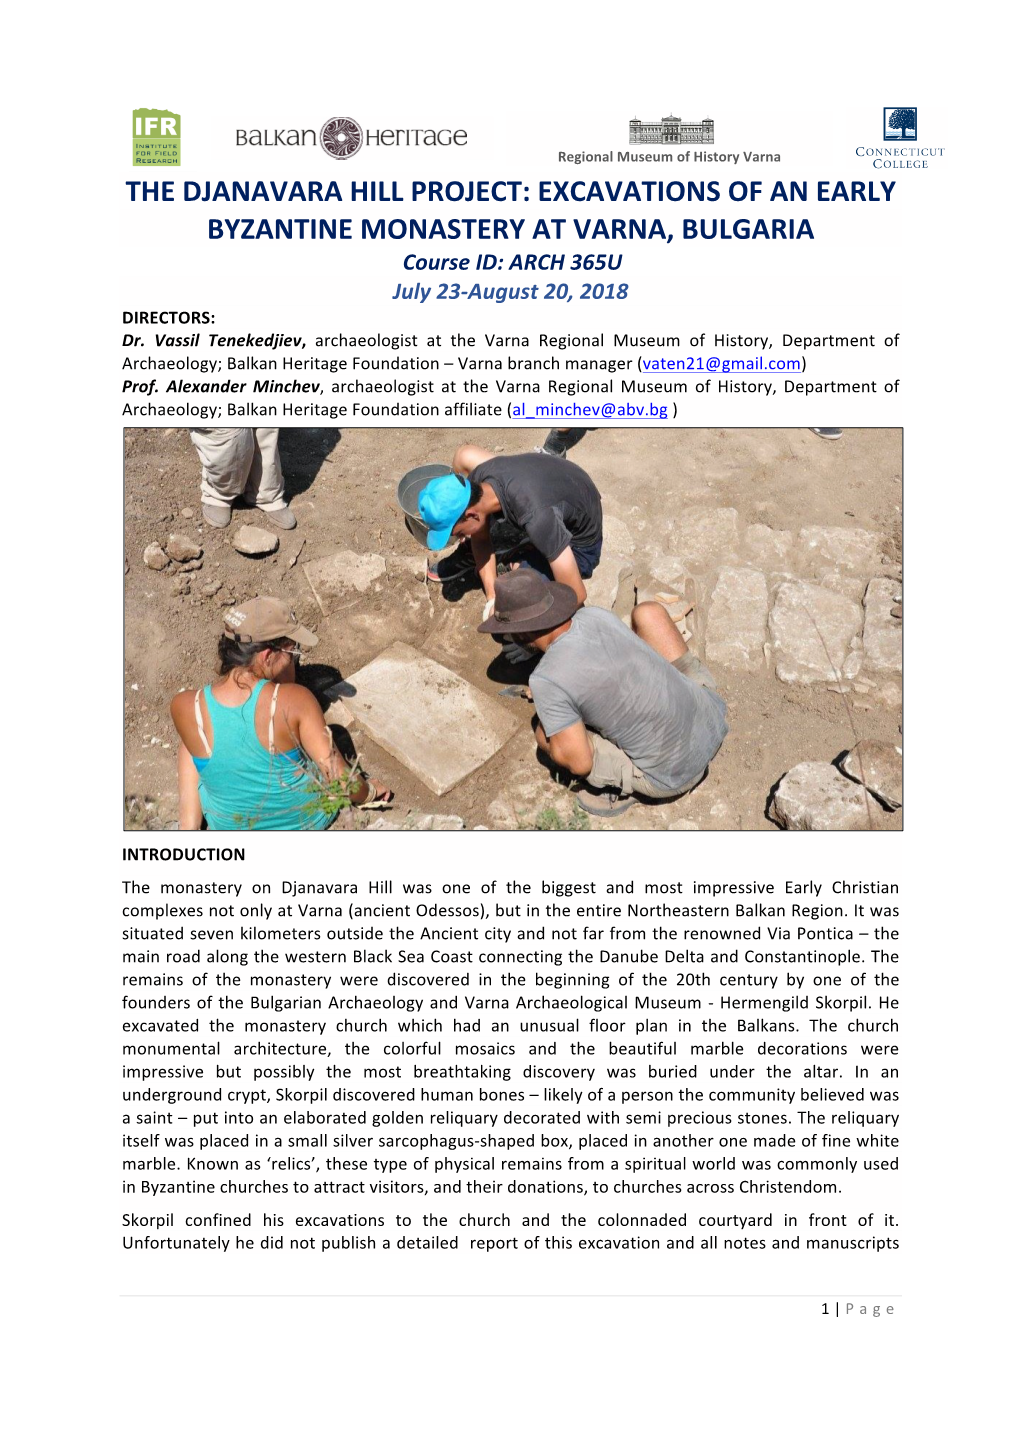 EXCAVATIONS of an EARLY BYZANTINE МONASTERY at VARNA, BULGARIA Course ID: ARCH 365U July 23-August 20, 2018 DIRECTORS: Dr